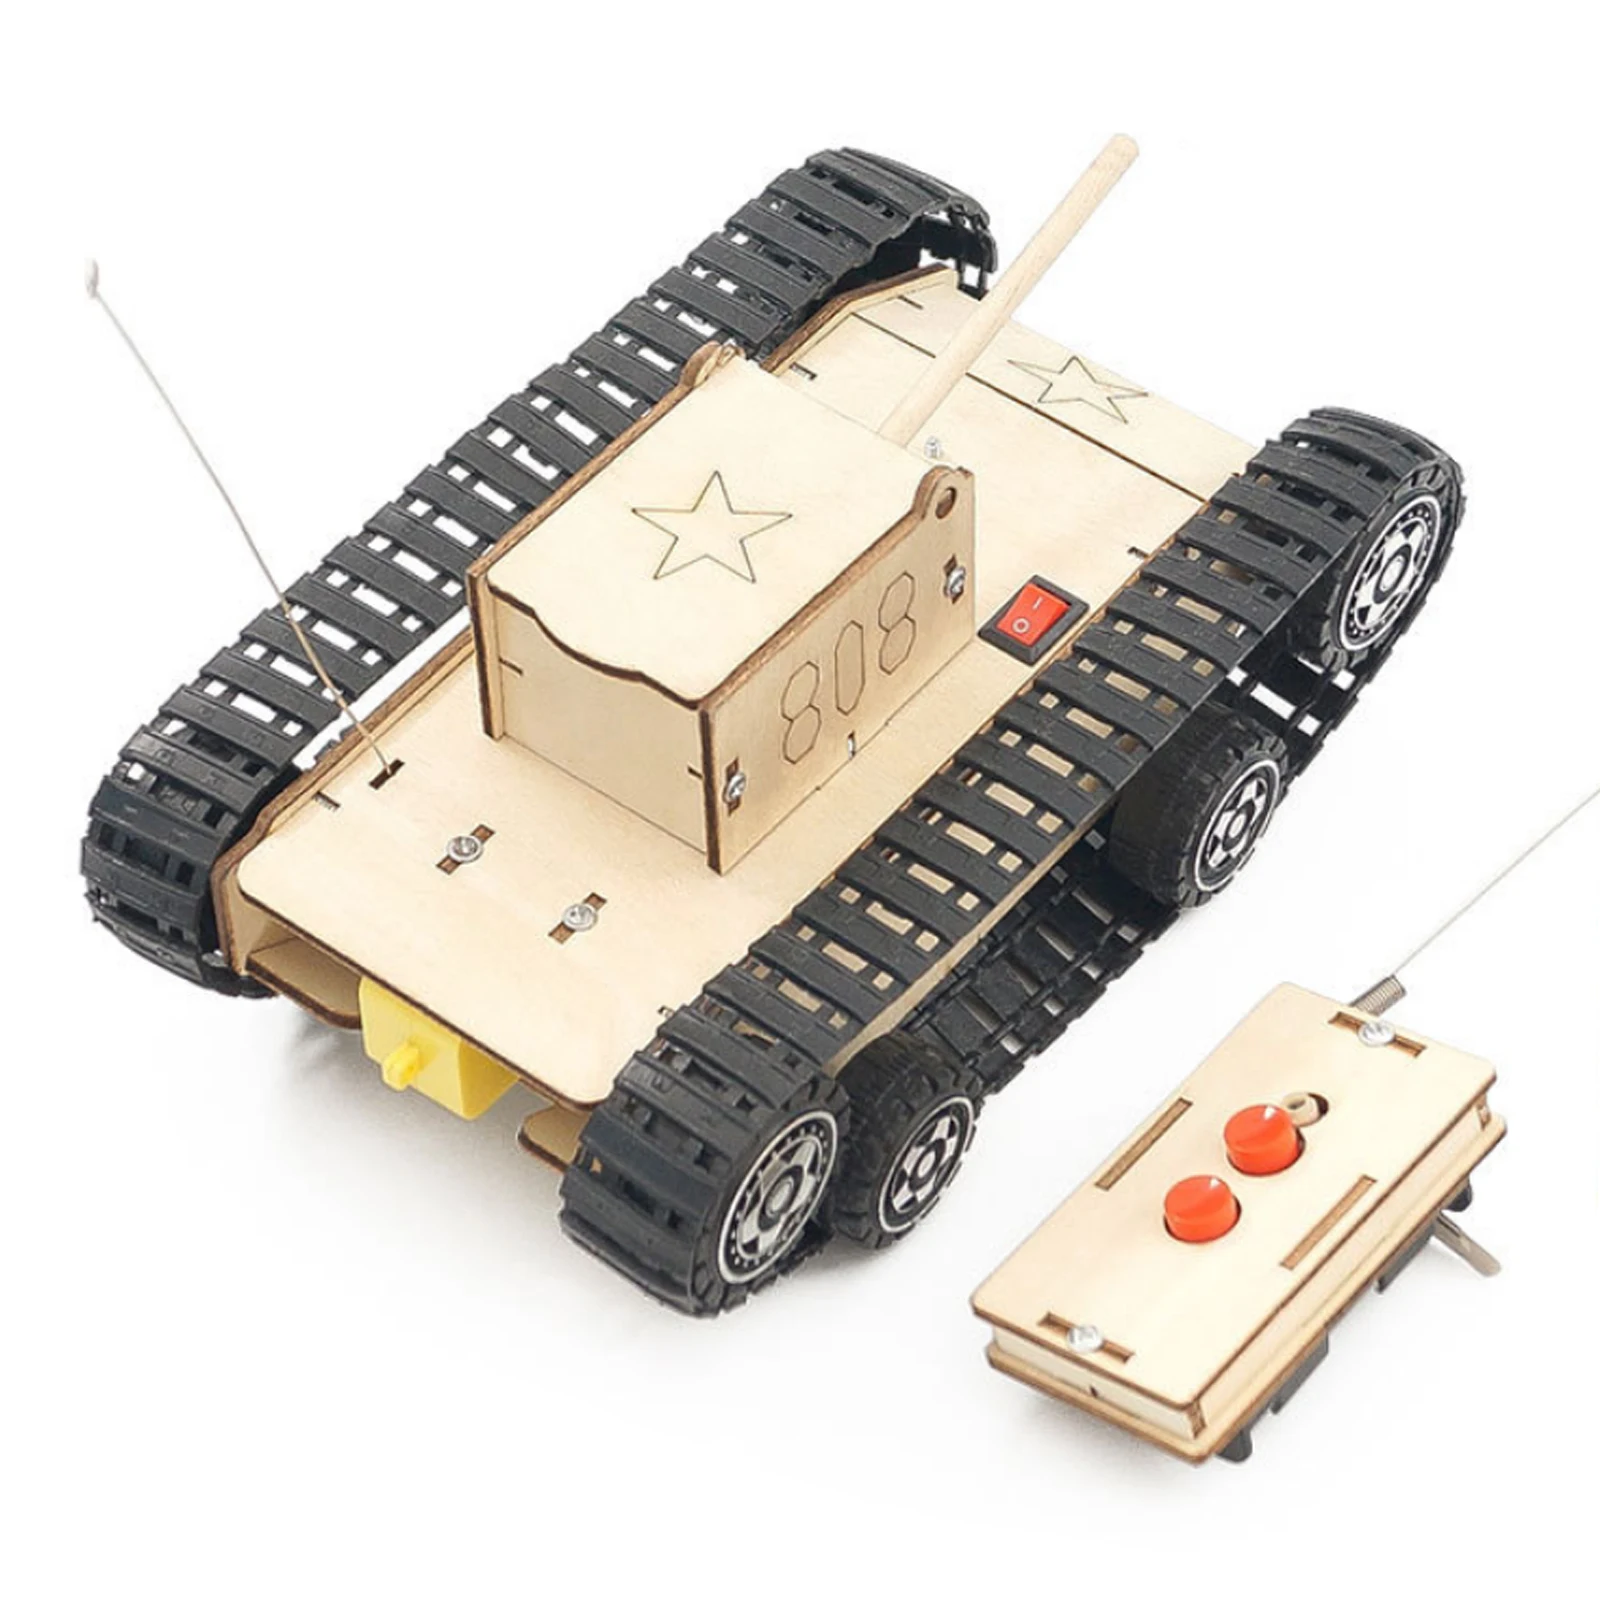 Hand Made DIY Wooden Remote Control RC Tank Model Creative STEM Toys Science Experiment Kit Assembled Material Wood Puzzle Toys science expriment infrared sensor alarm diy stem toy wood assemblekids science education toys puzzle kits creative